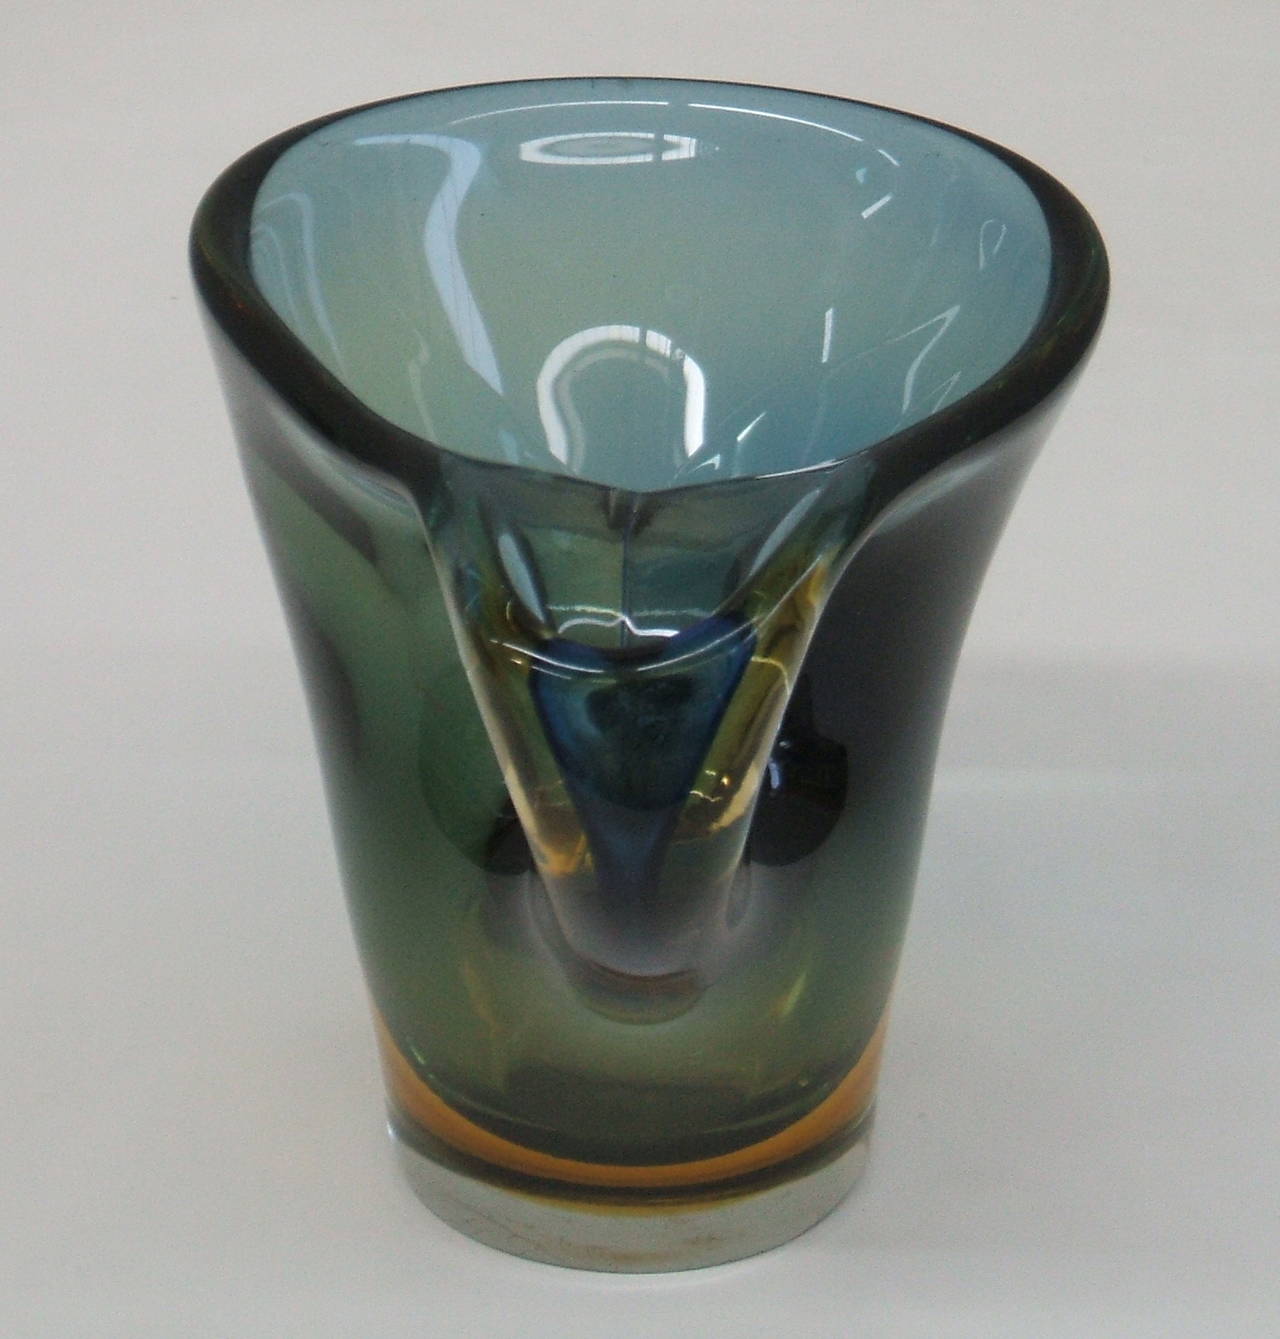 Murano Glass Pitcher Attributed to Fulvio Bianconi In Excellent Condition For Sale In Piacenza, Italy